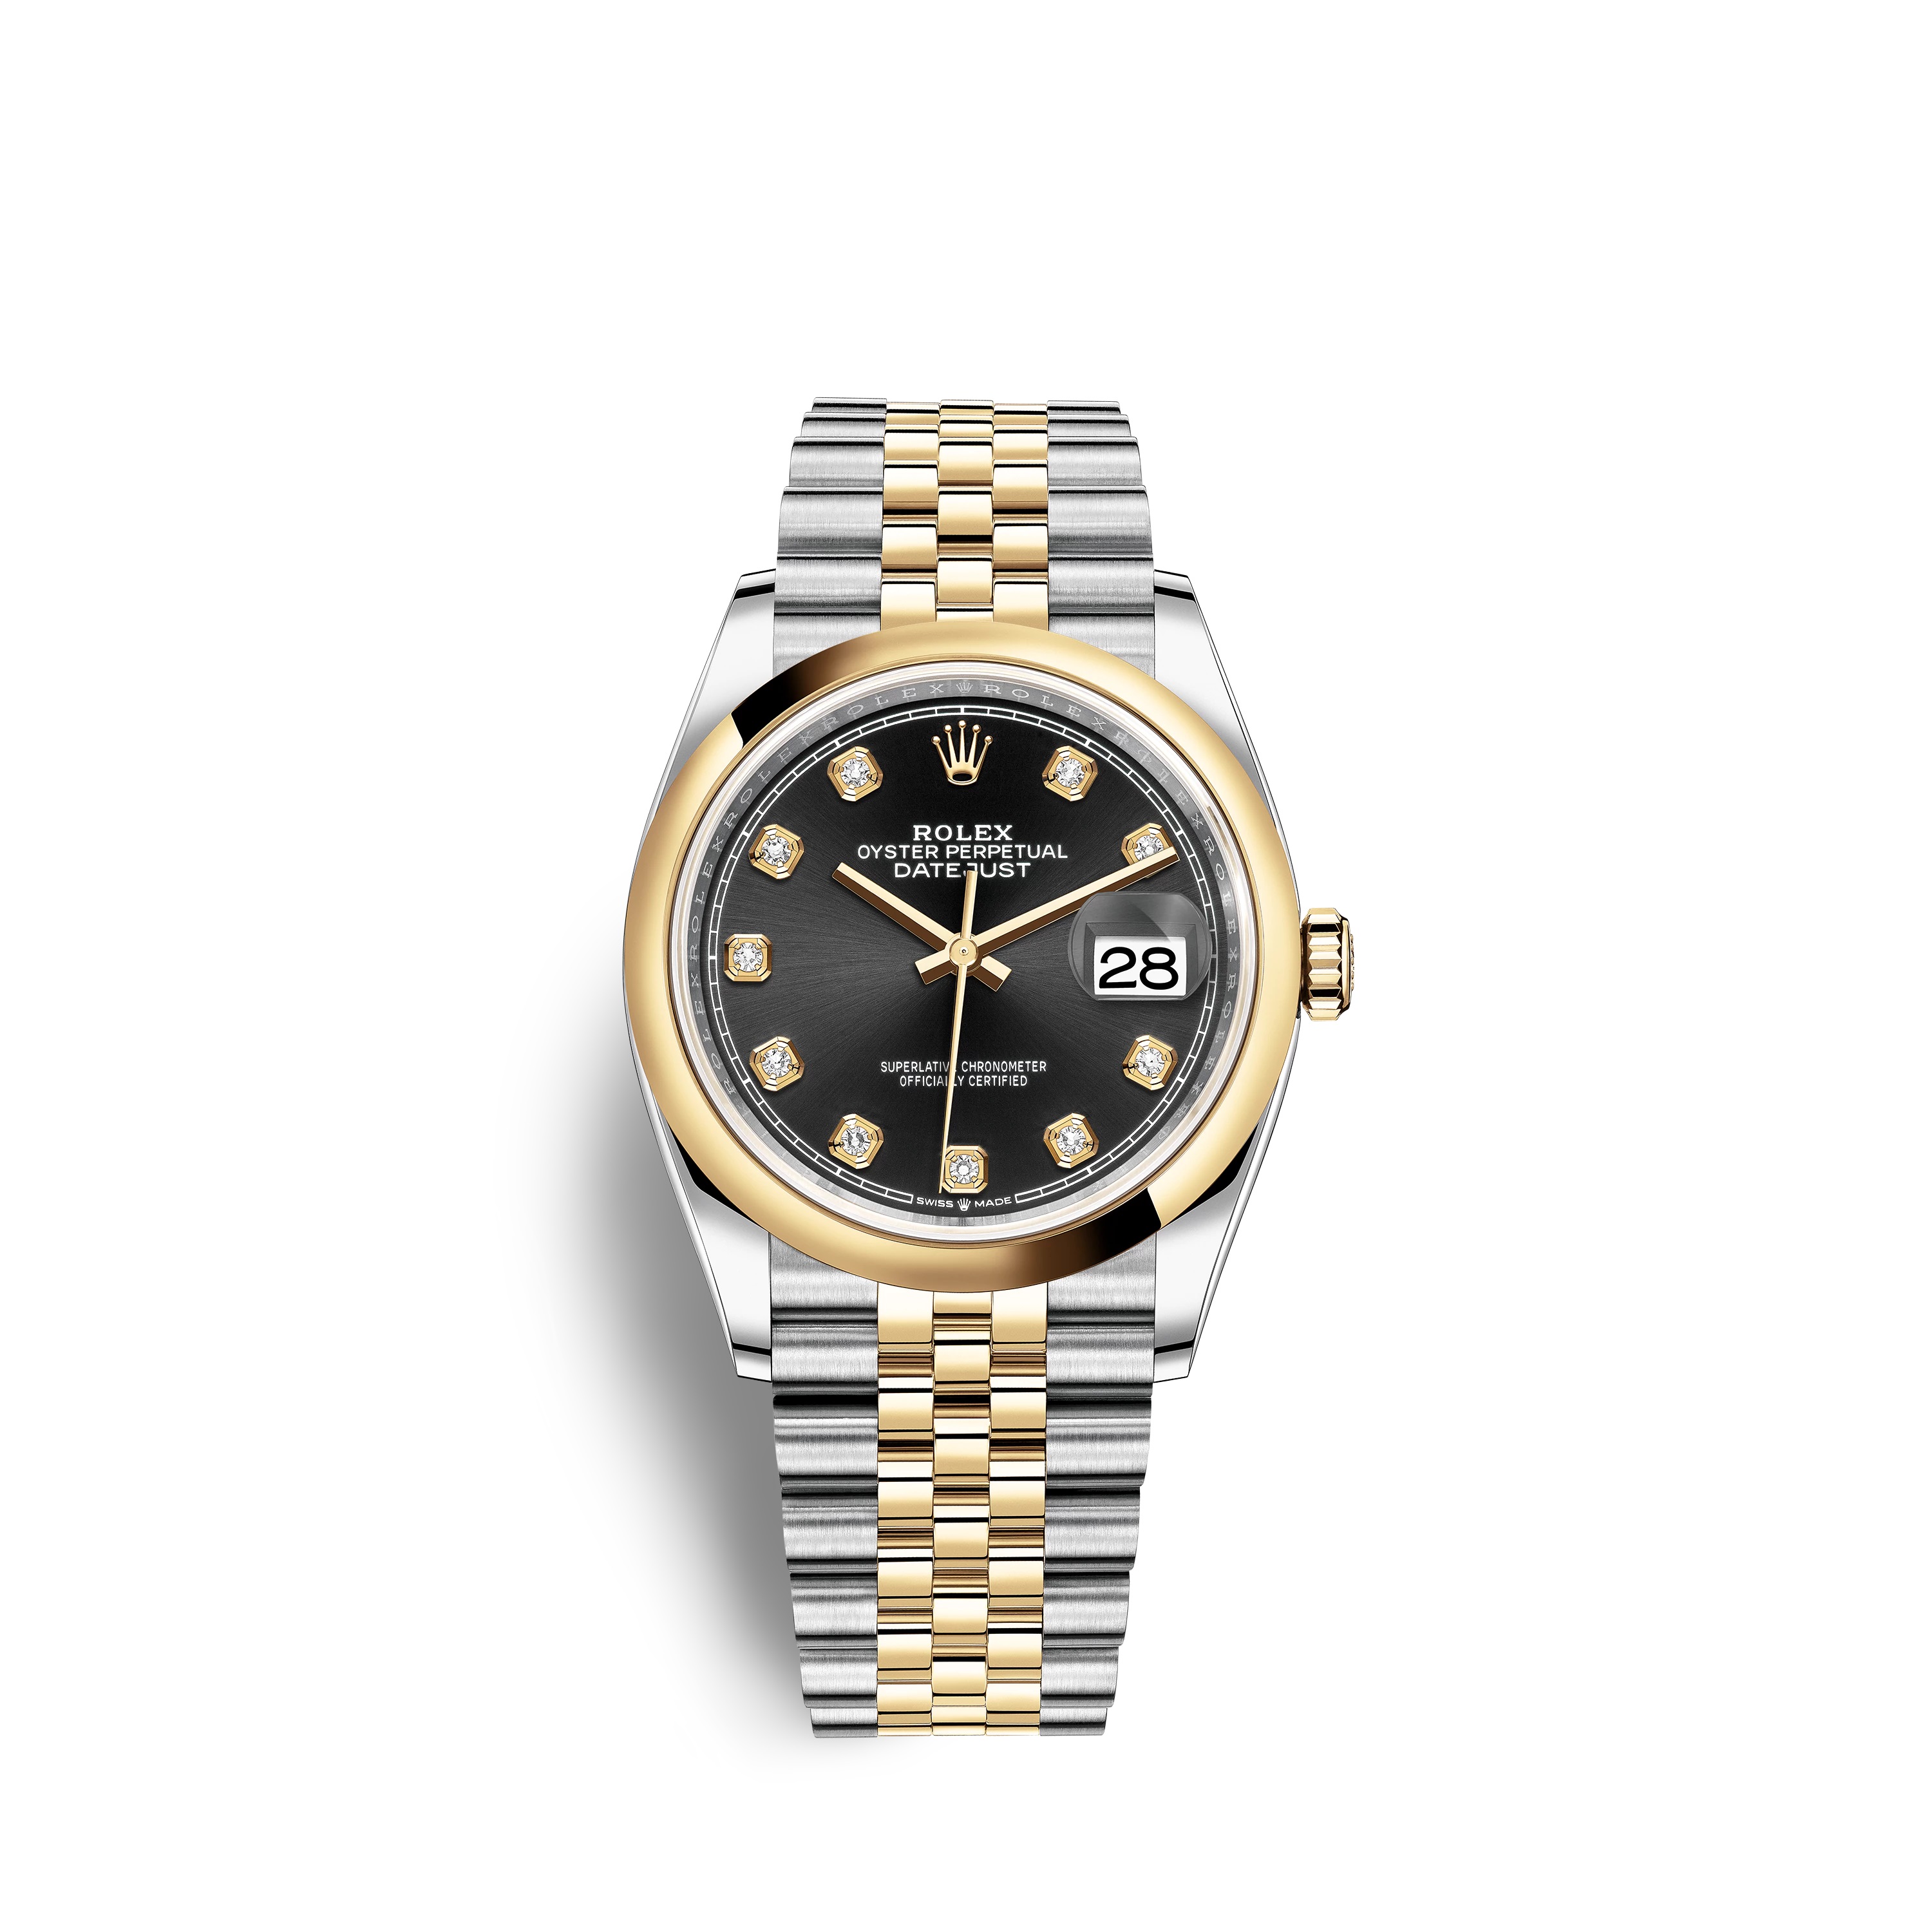 Datejust 36 126203 Gold & Stainless Steel Watch (Black Set with Diamonds)